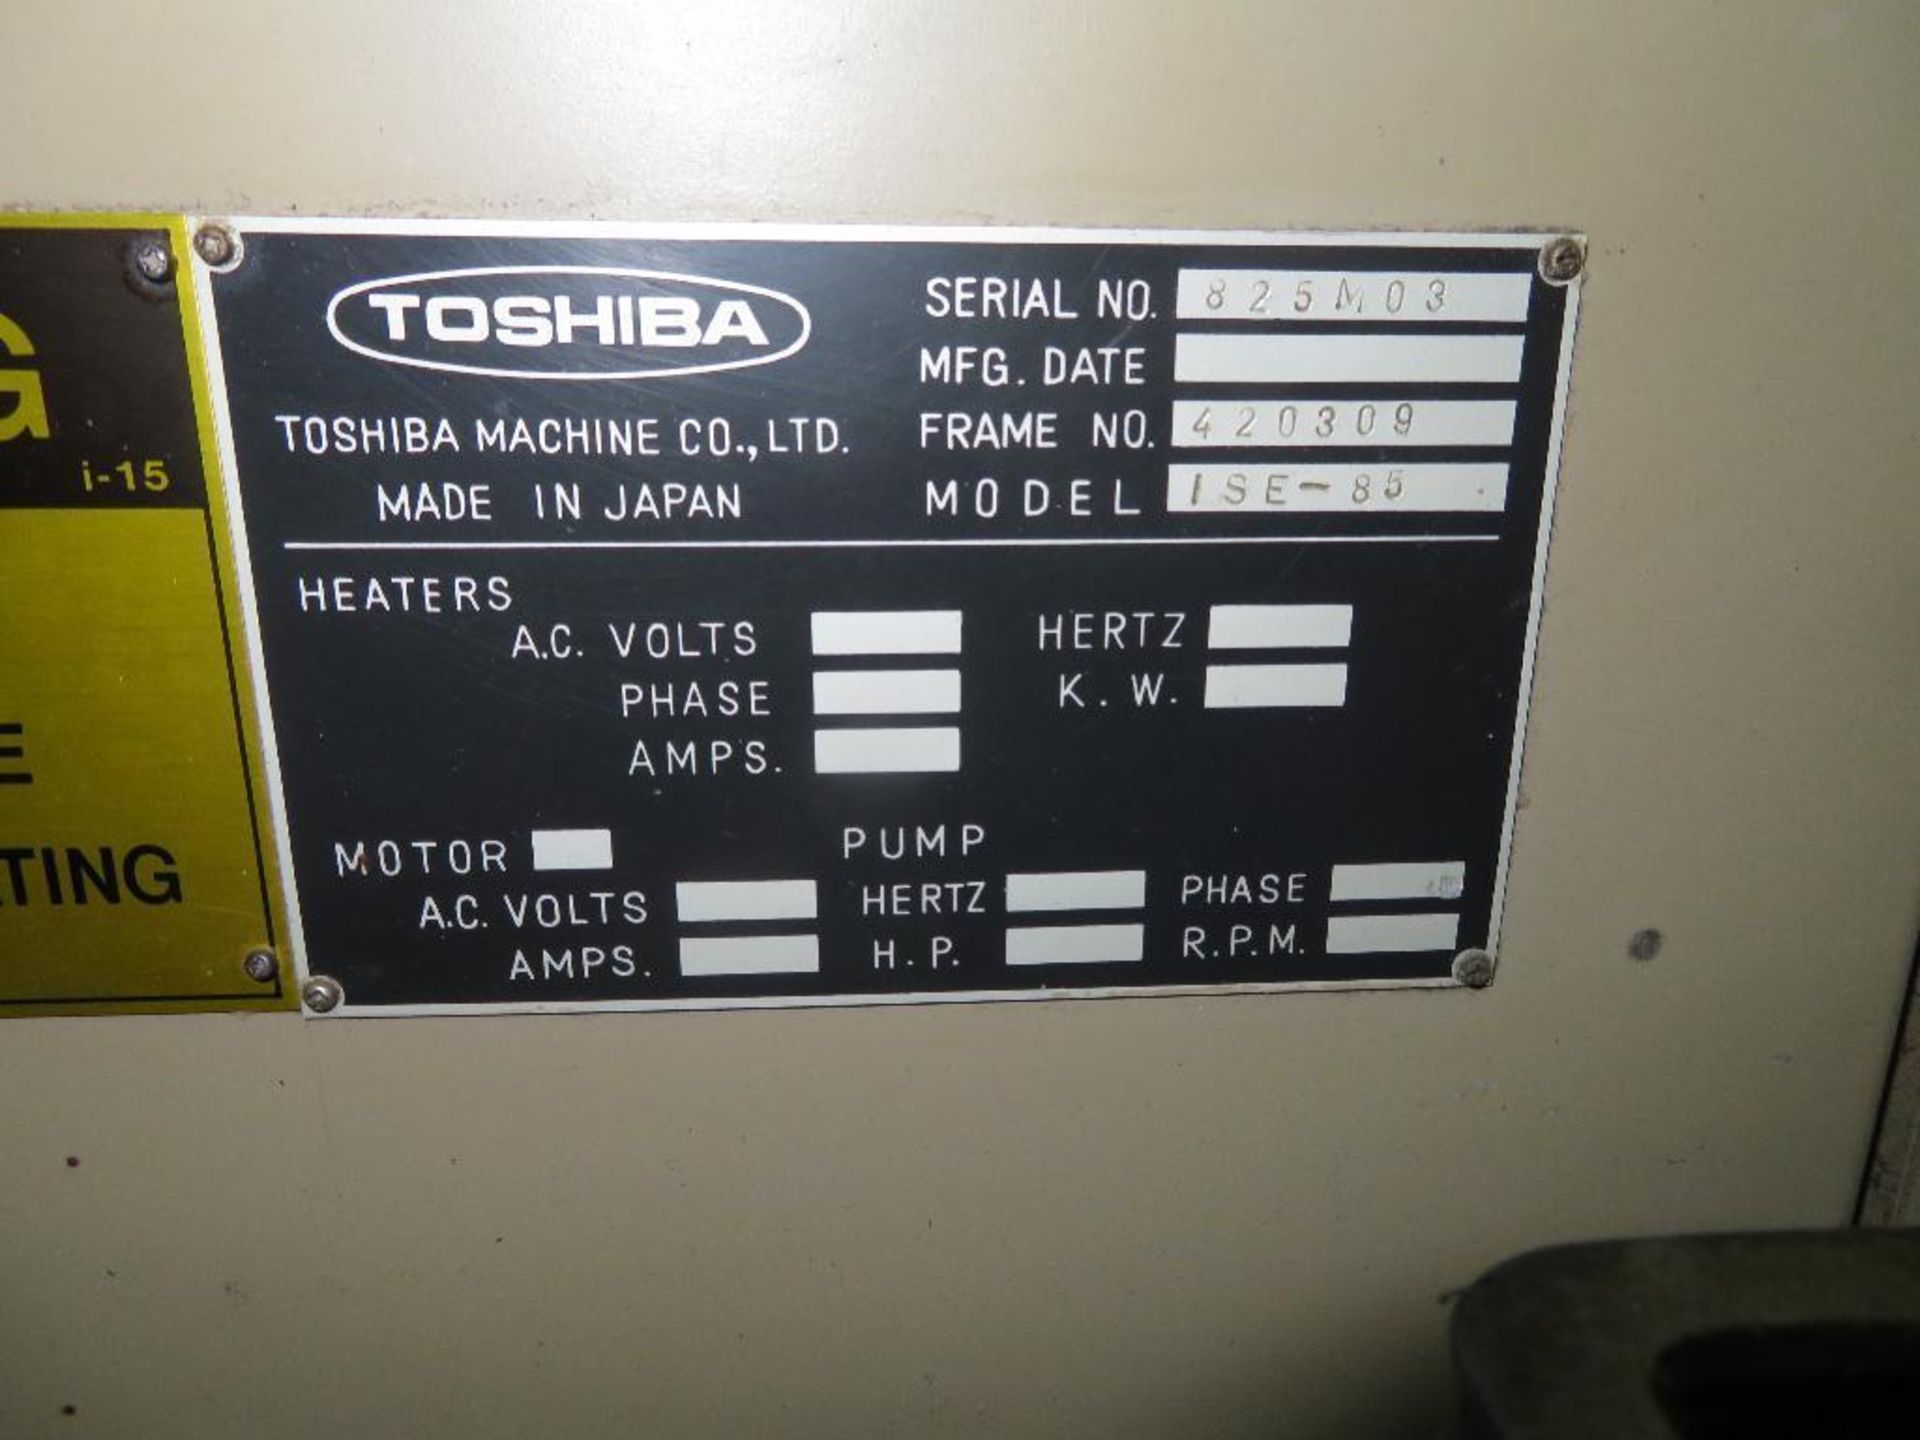 Toshiba 85 Ton, 4.6 oz. Hydraulic Injection Molding Machine Model ISE85-2B, S/N 420309 (1984), 14 in - Image 5 of 5